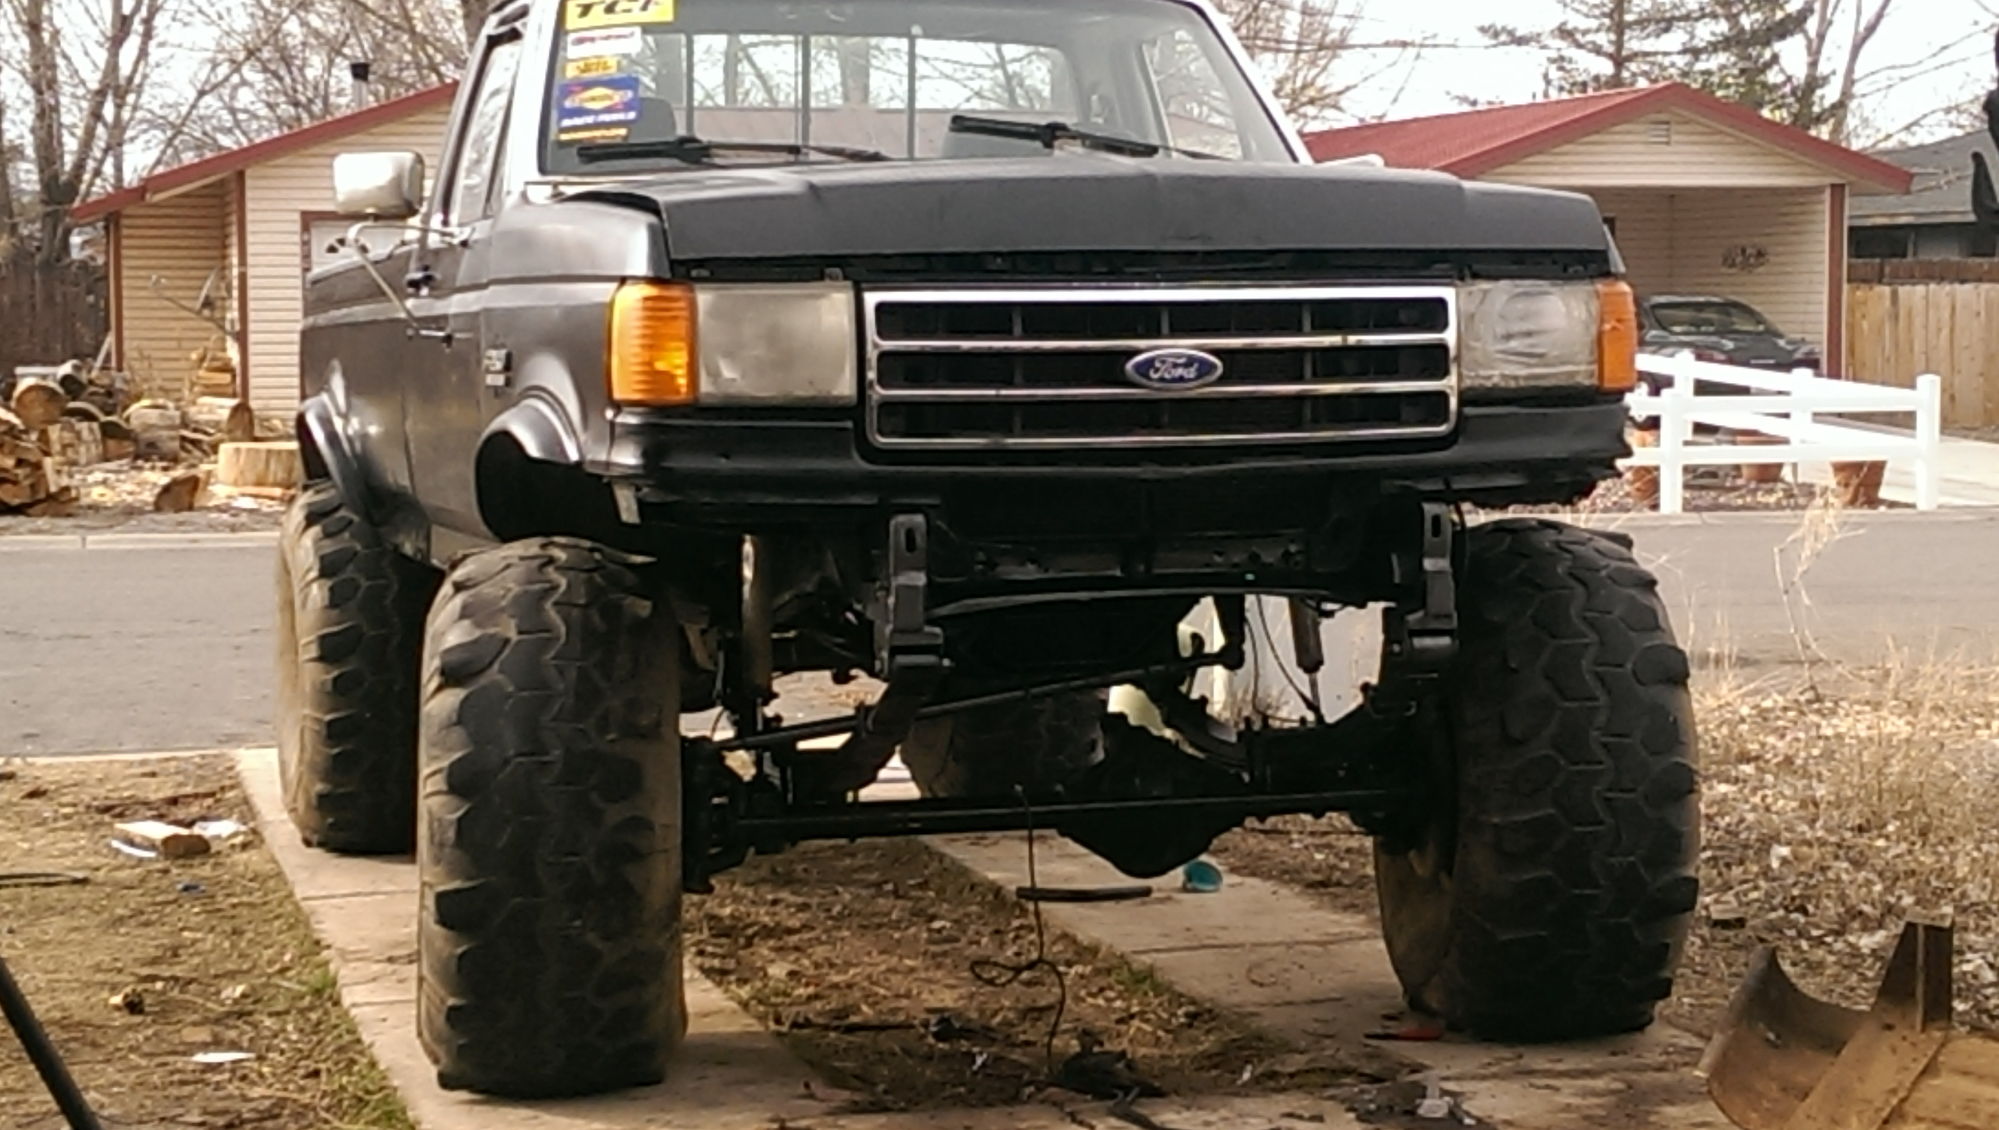 my 88 F250 build. - Ford Truck Enthusiasts Forums - 1999 x 1130 jpeg 278kB